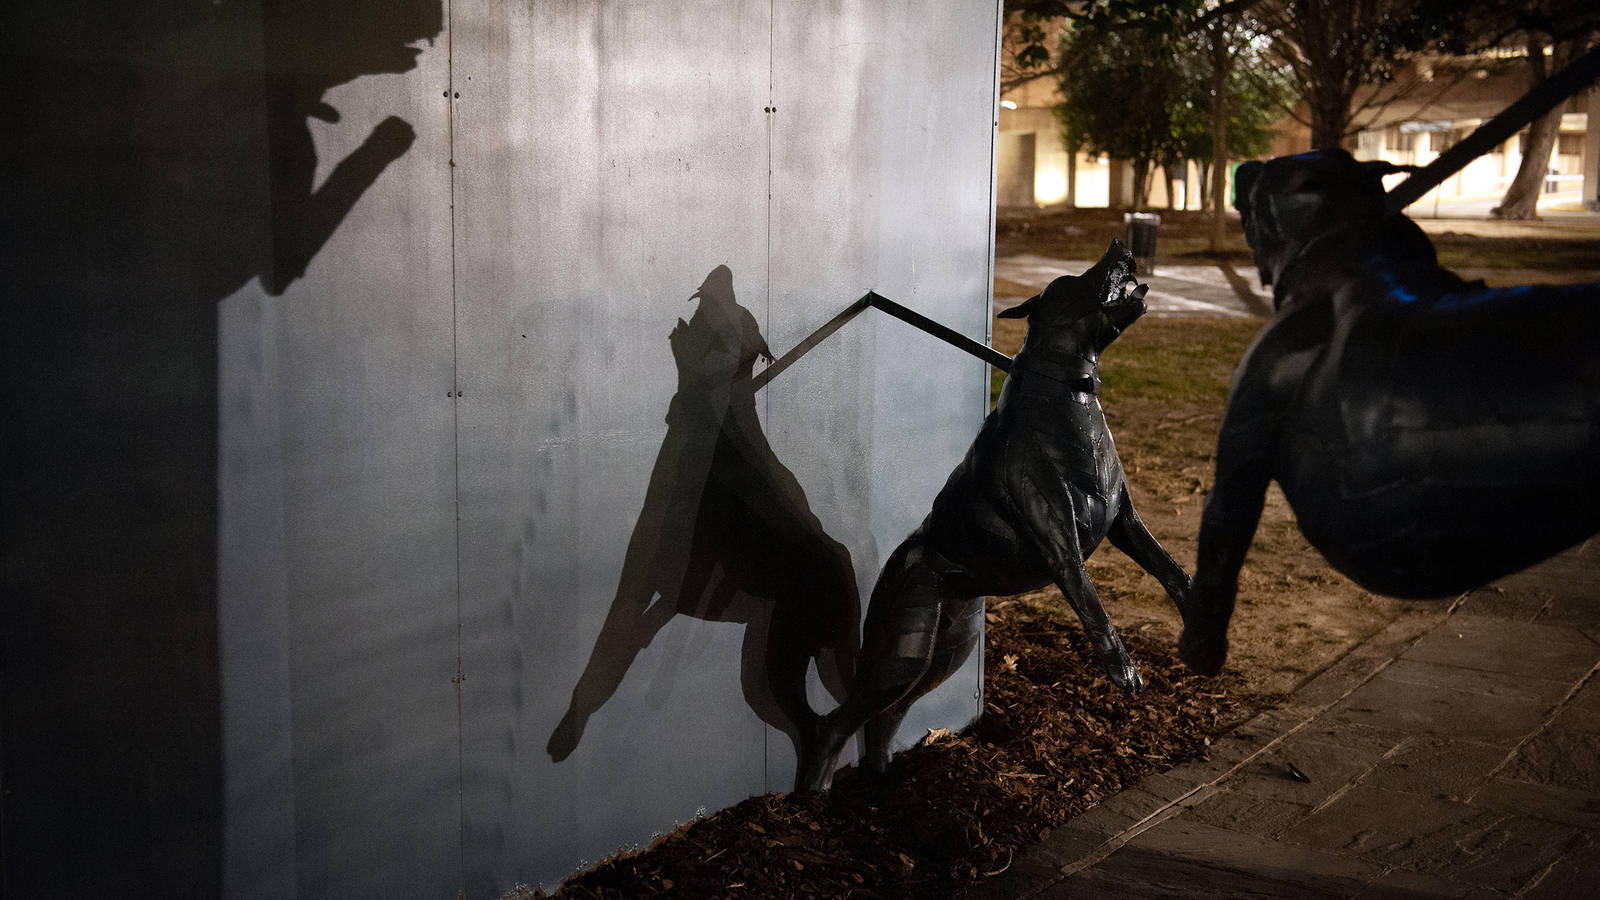 <p>Scrap iron police dogs created by artist James Drake lunge across a walkway in Kelly Ingram Park. Police used attack dogs, fire hoses, tear gas and clubs to disrupt civil rights demonstrations in the 1960s. Thousands of peaceful protesters were arrested and jailed, including more than 600 children.</p>